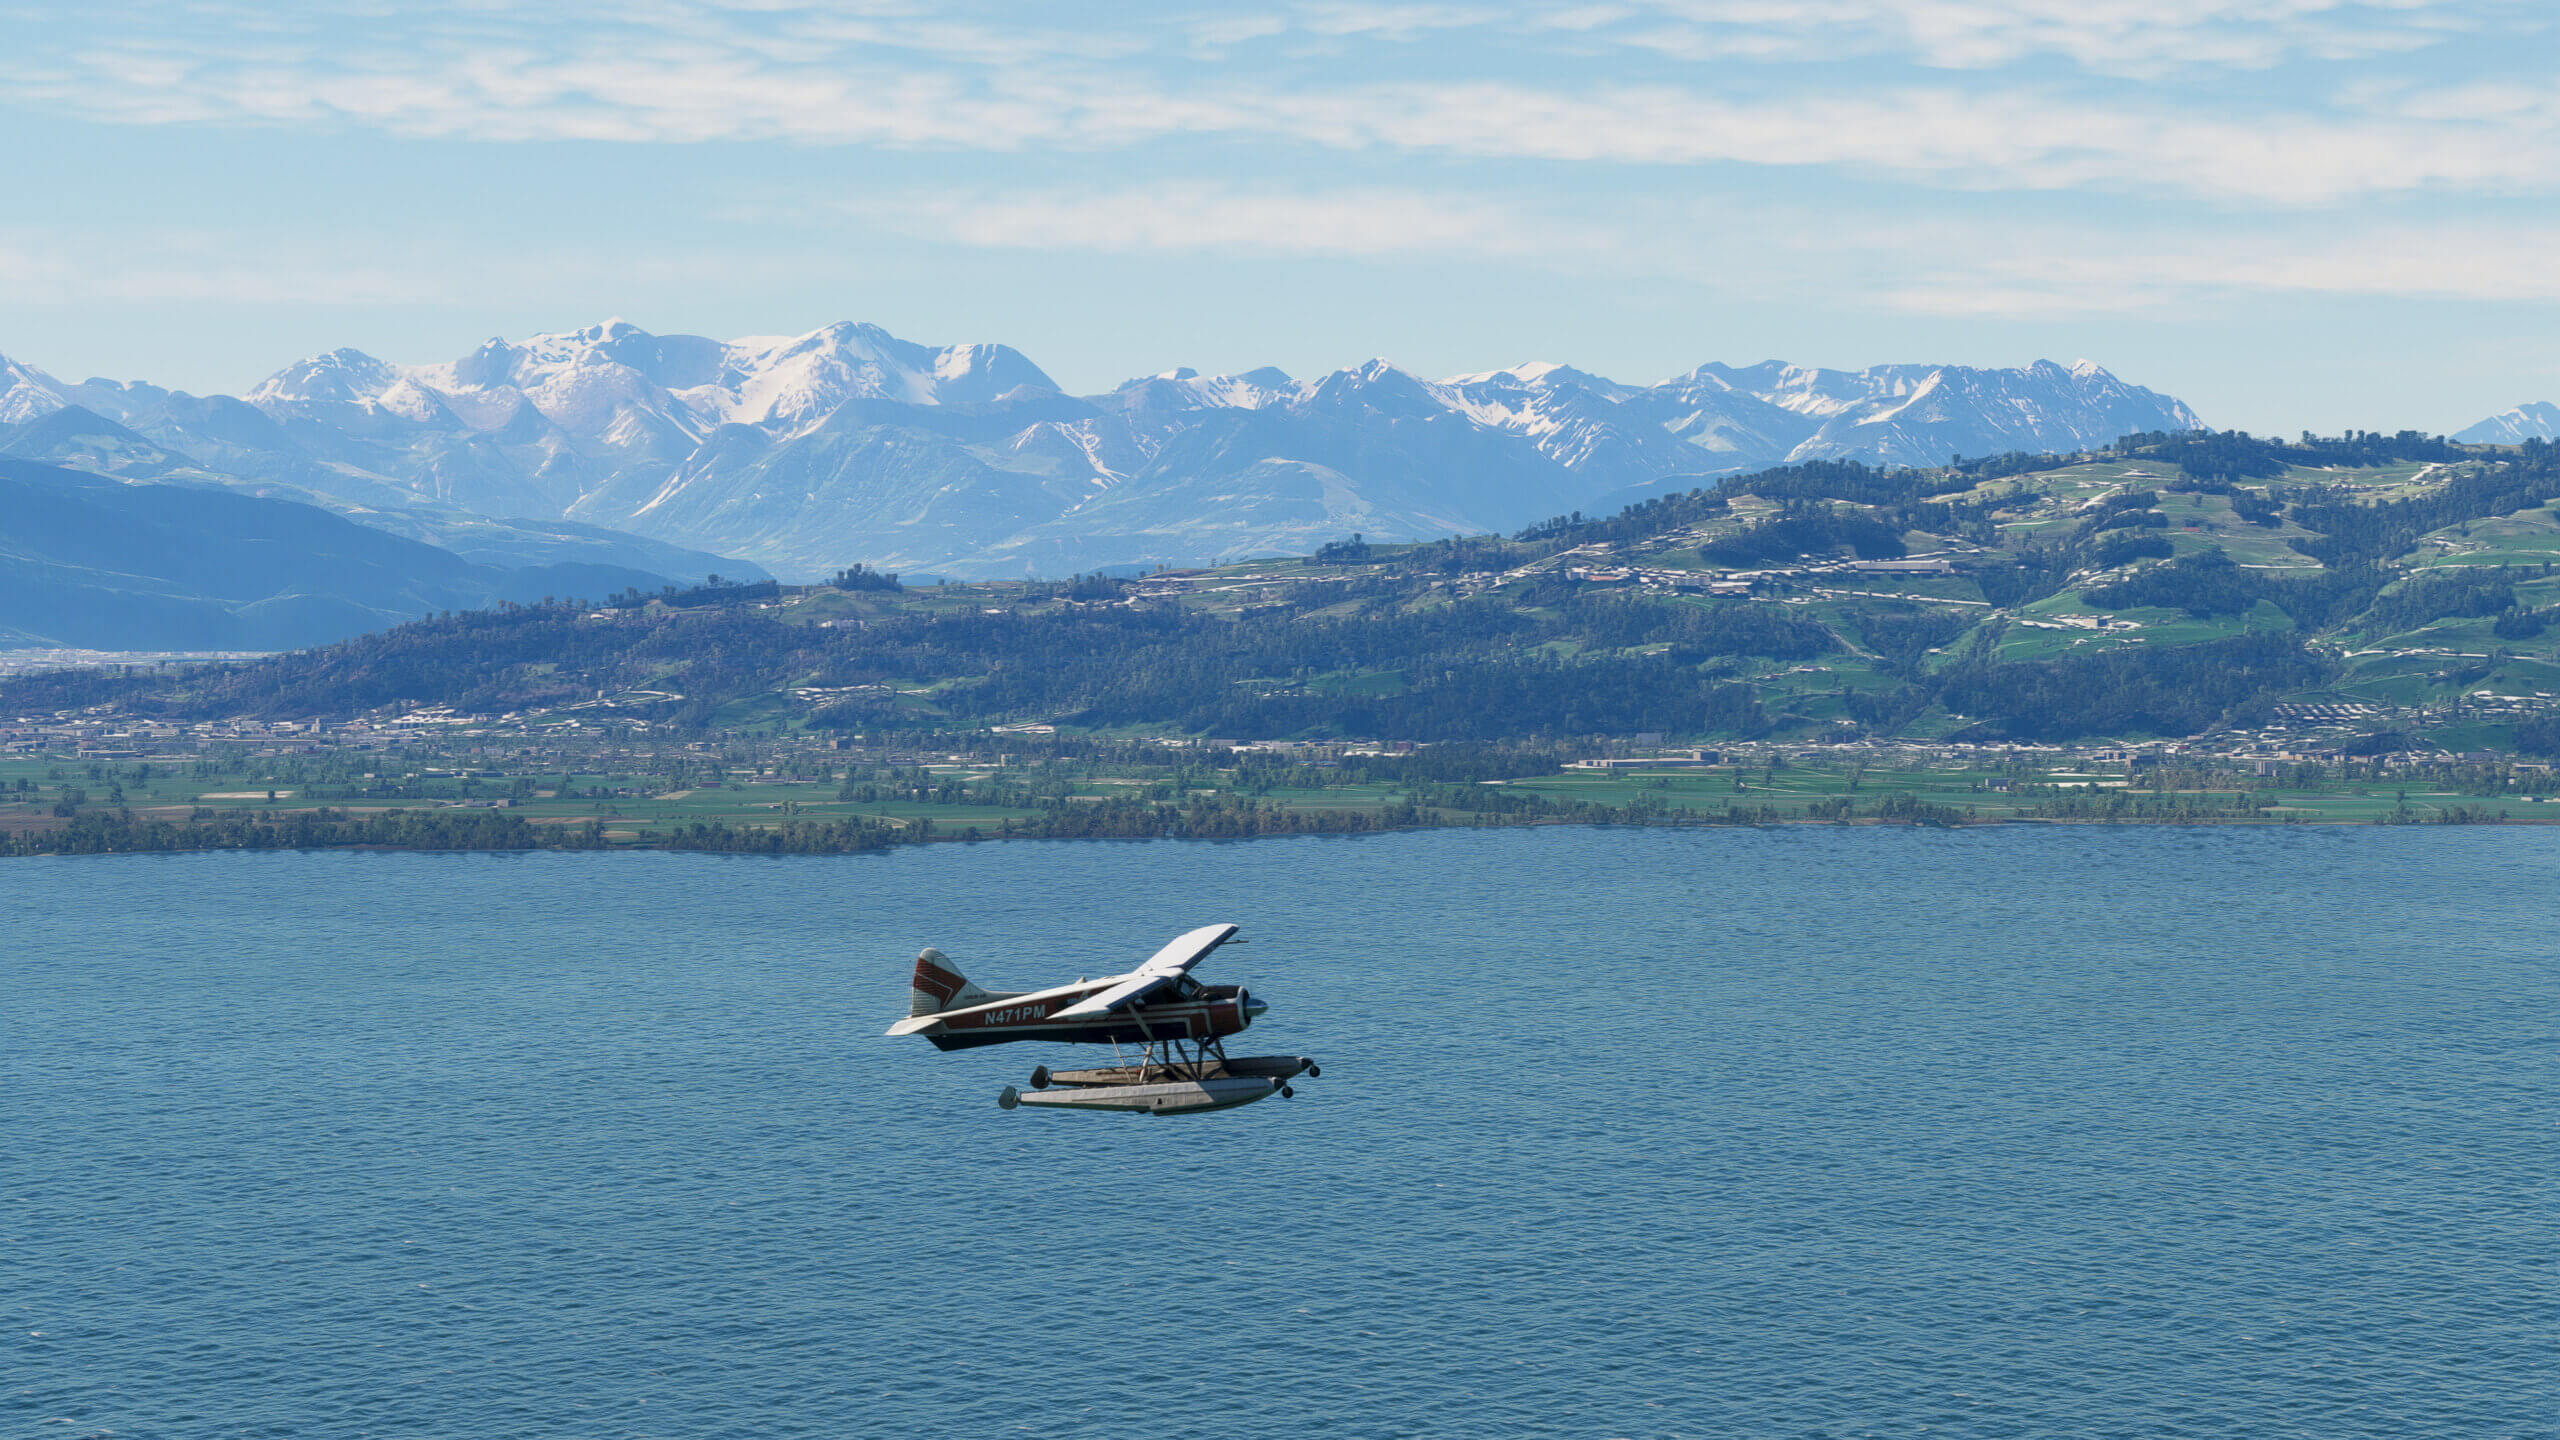 A de Havilland DHC-2 Beaver on floats flies over a lake in Germany.